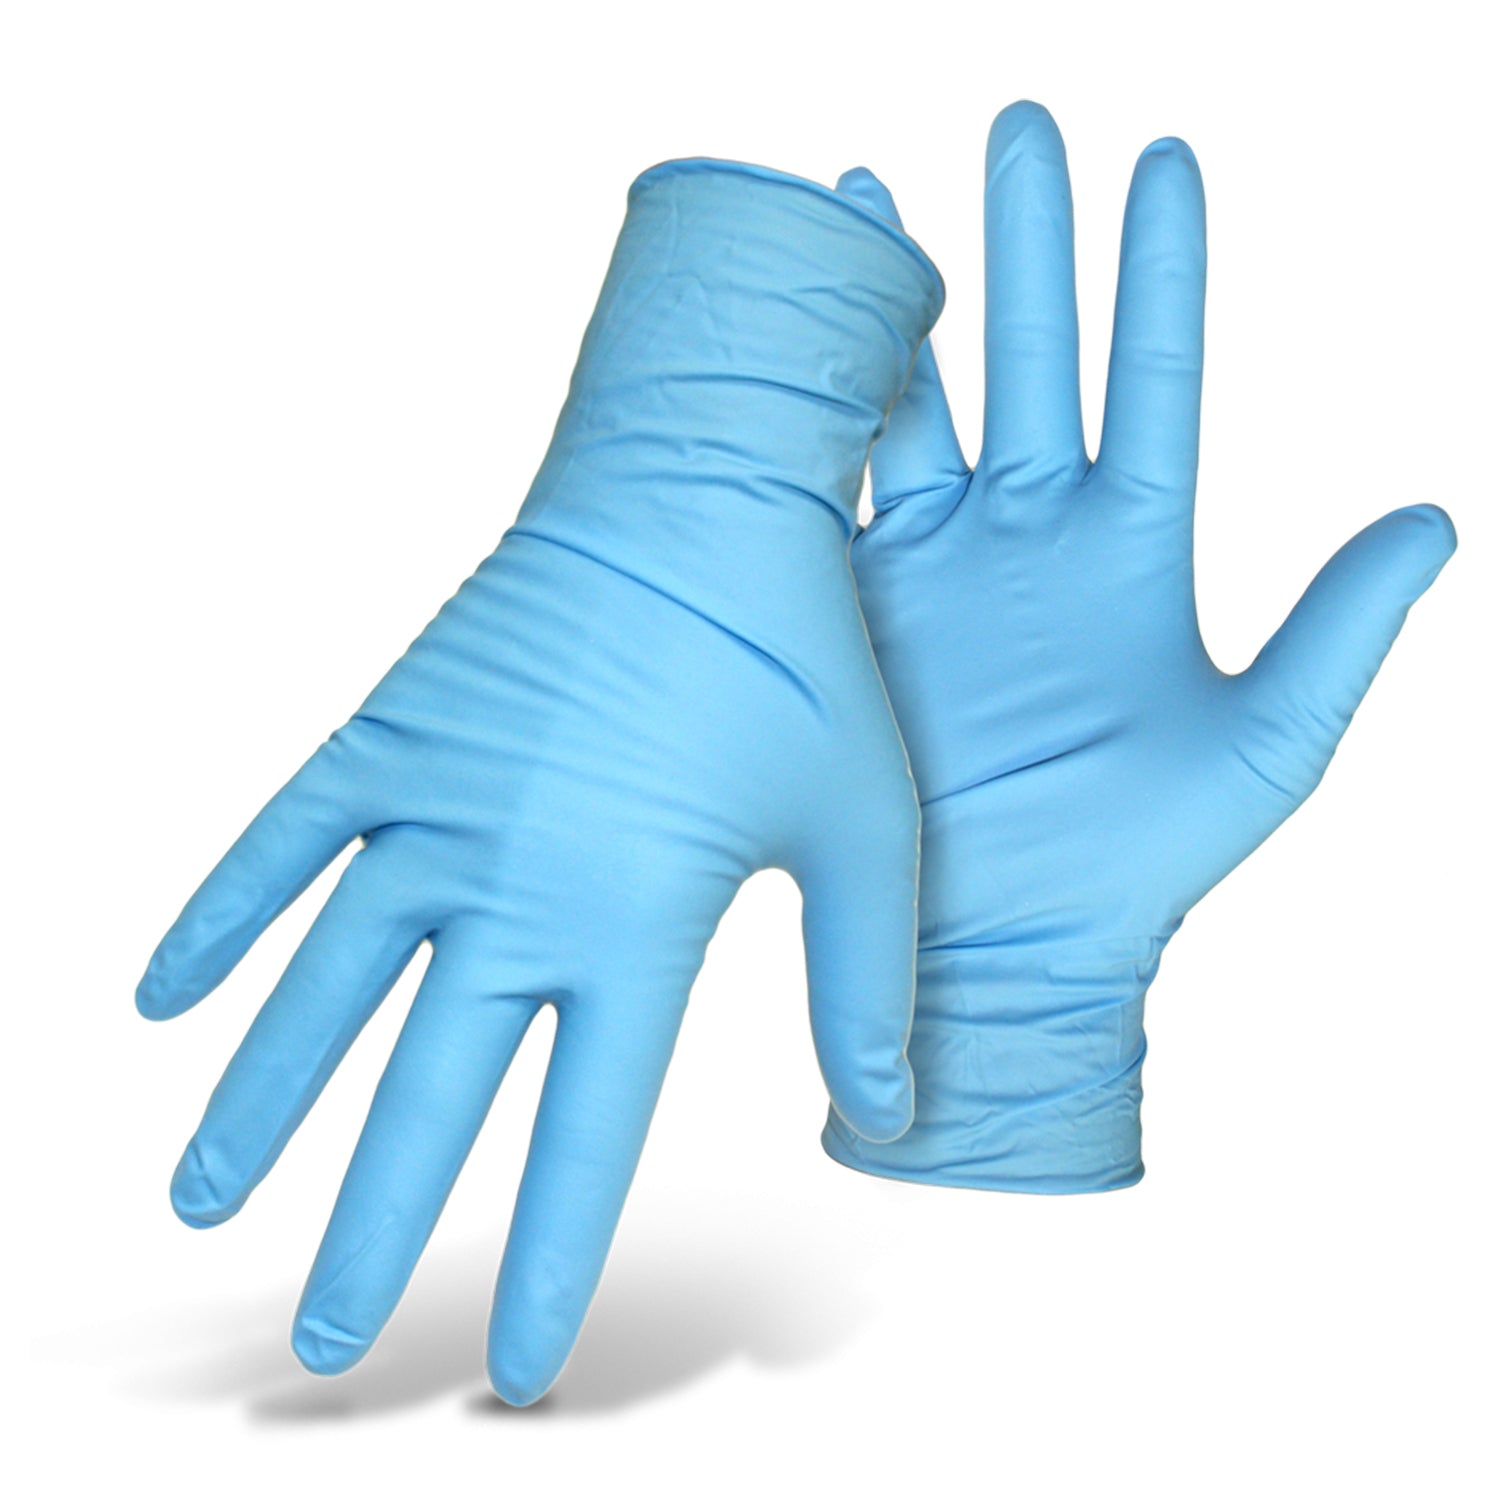 Premier AF Nitrile Examination Gloves | Sterile | Latex Free | Small | Pack of 50 Pairs (1)